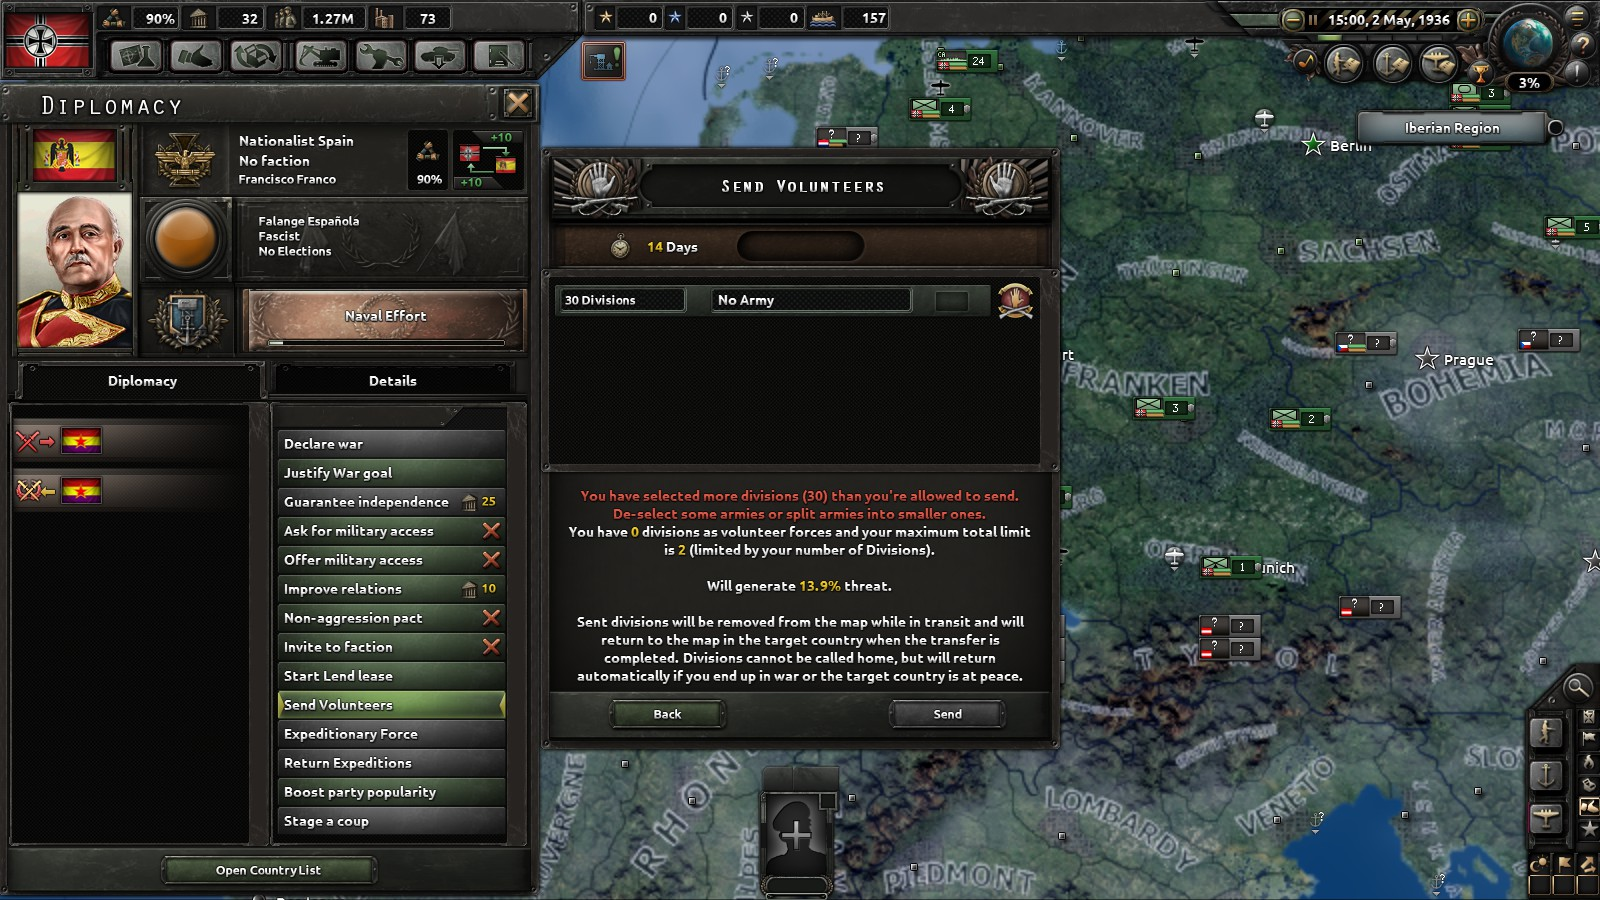 Why Are Volunteers Important In Hearts Of Iron IV?